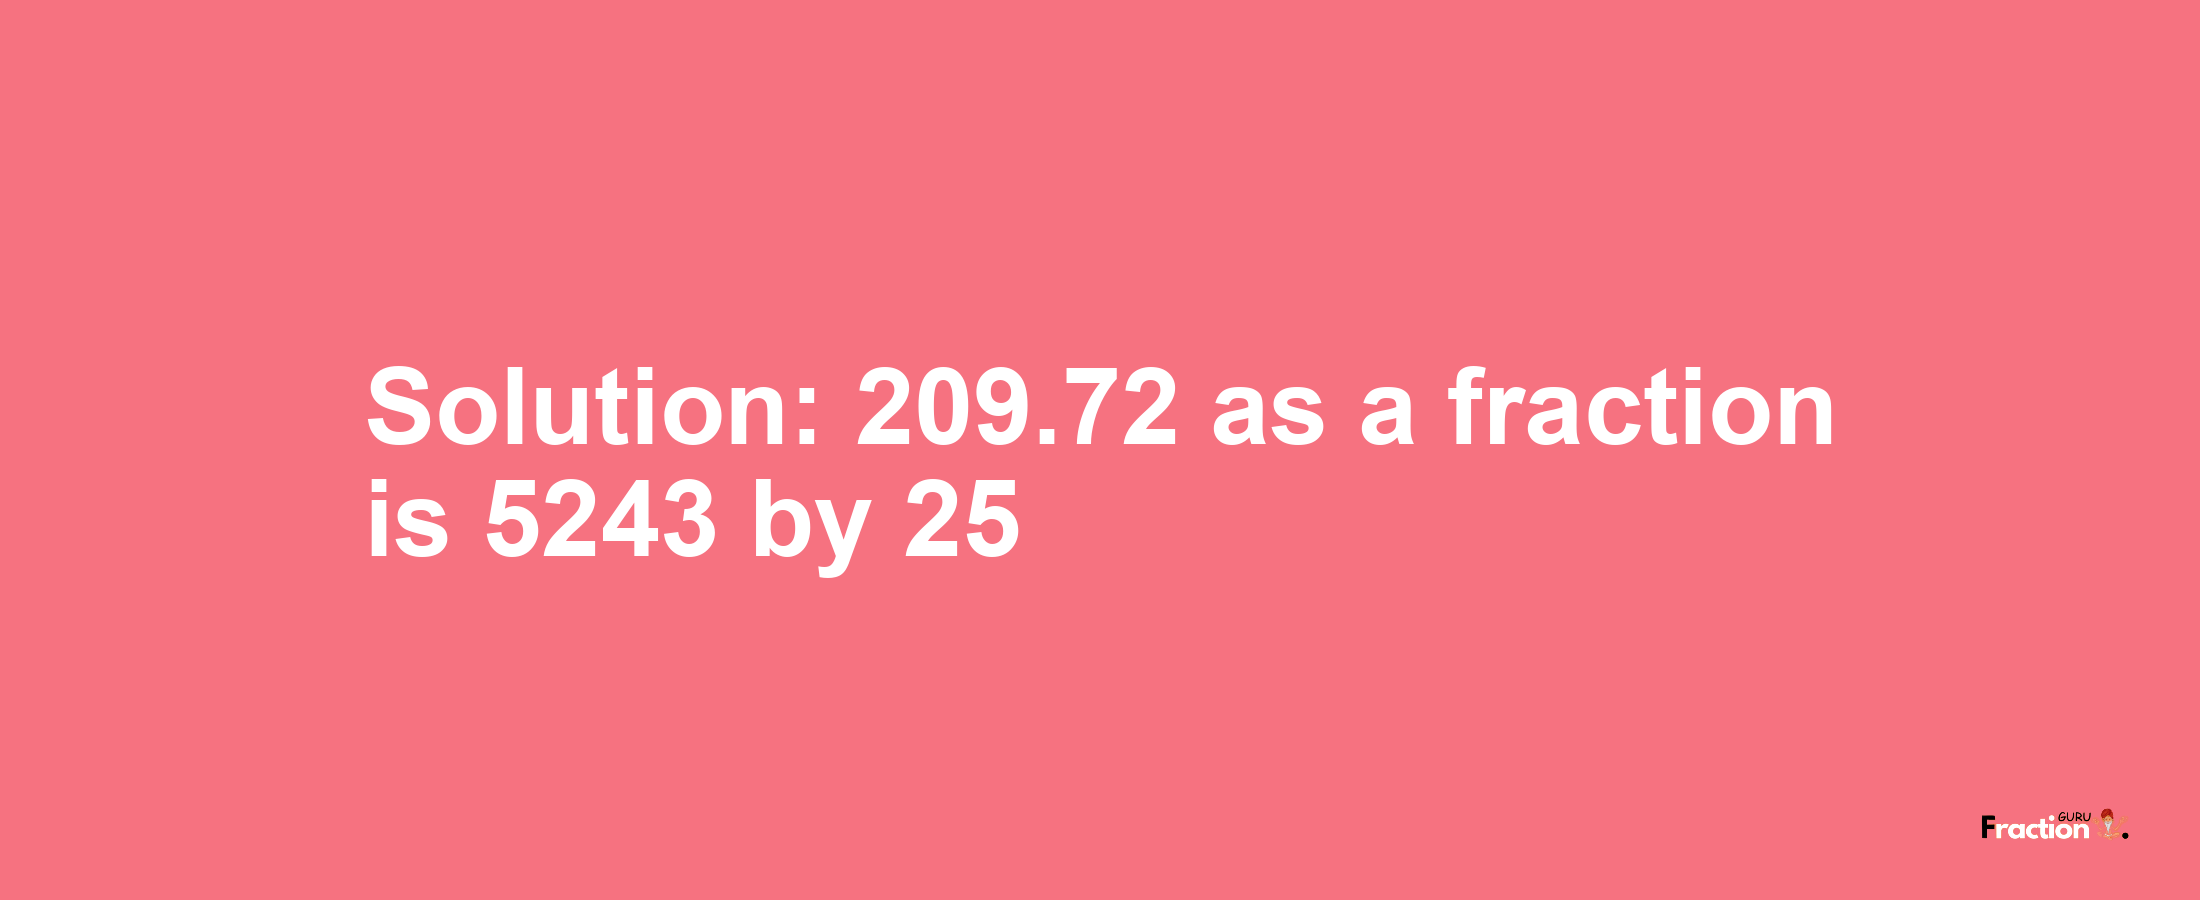 Solution:209.72 as a fraction is 5243/25